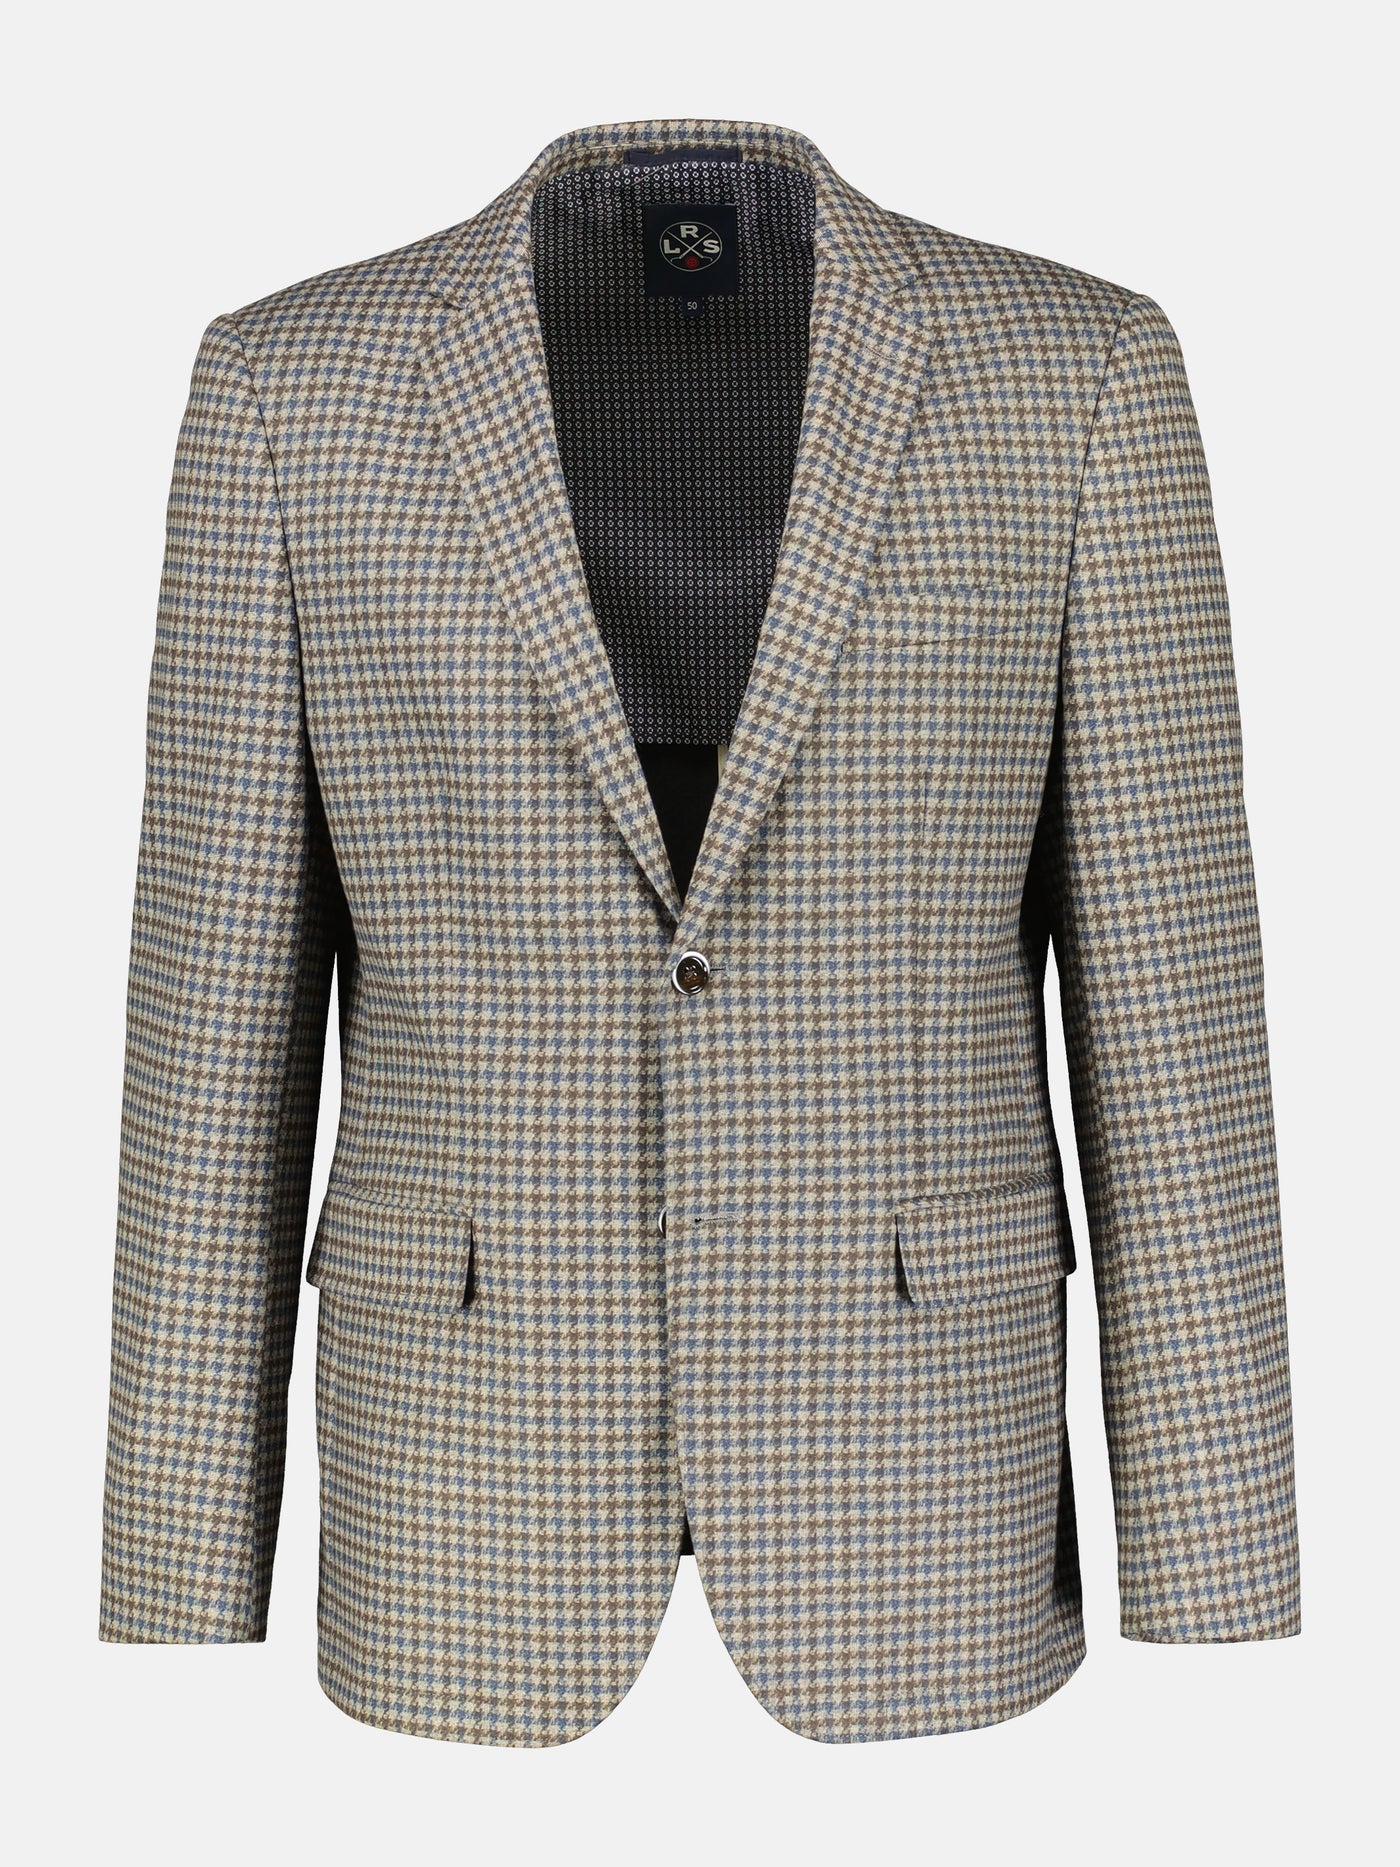 Jersey jacket with houndstooth pattern